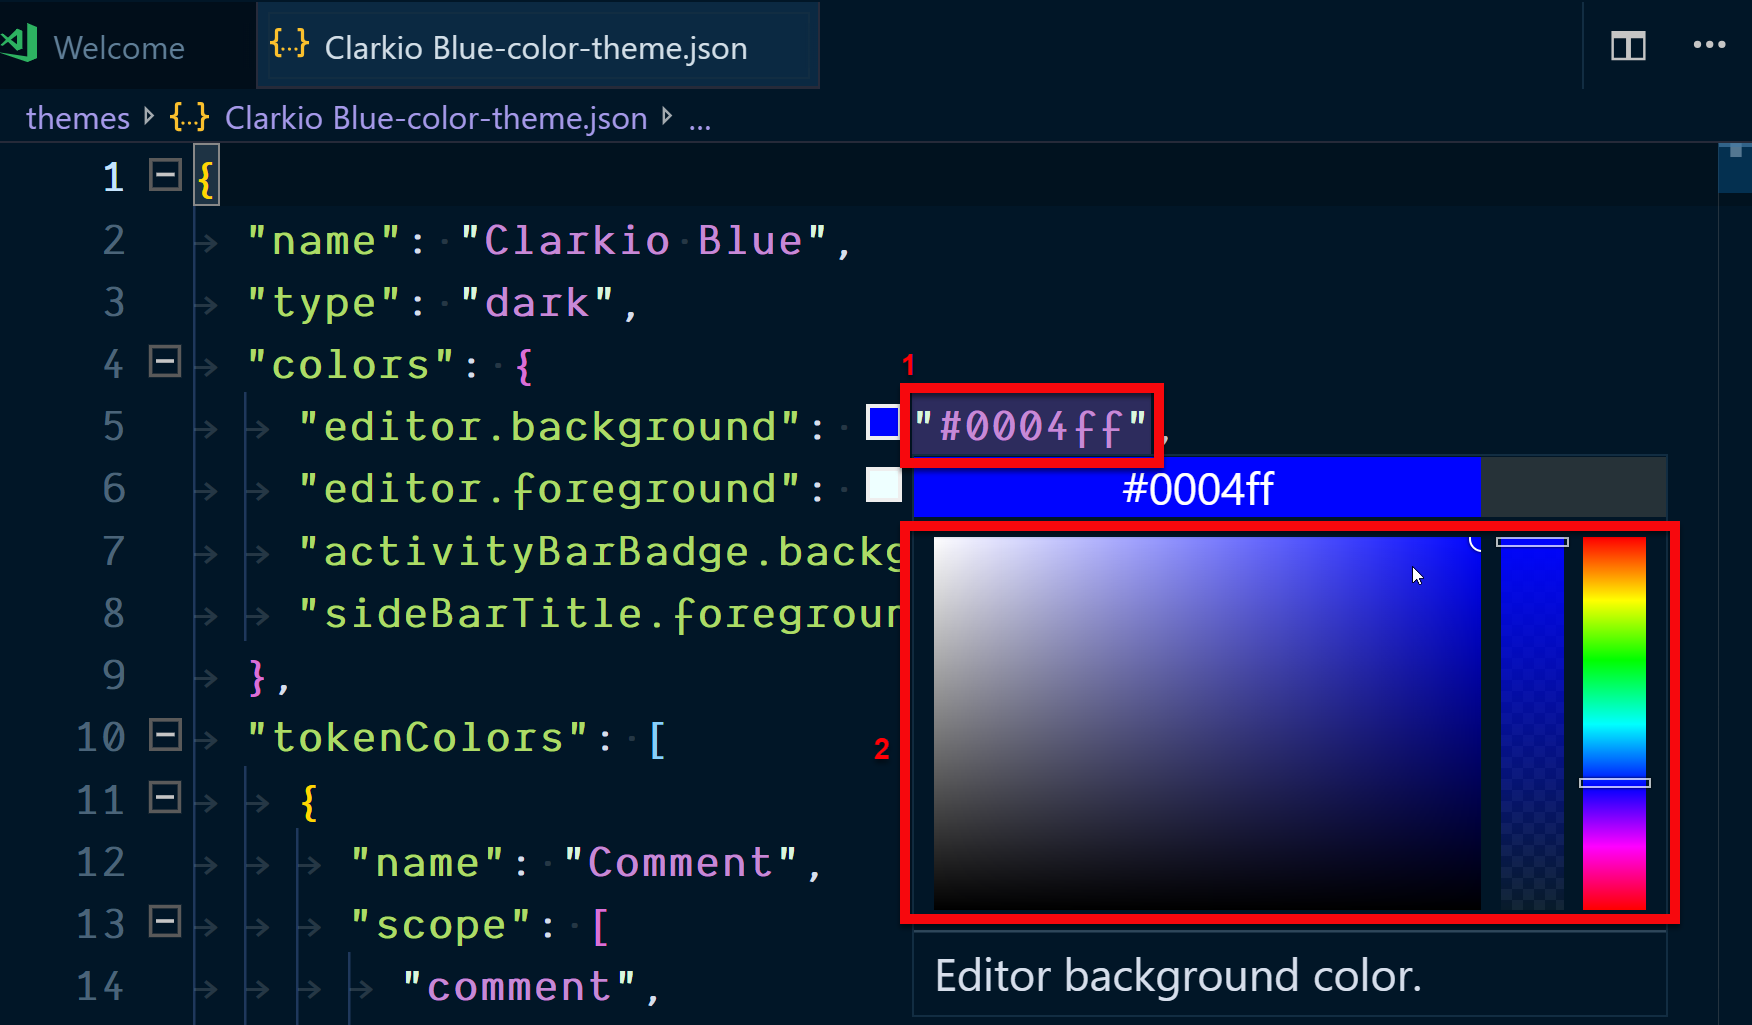 Editing the background color for the color theme in VS